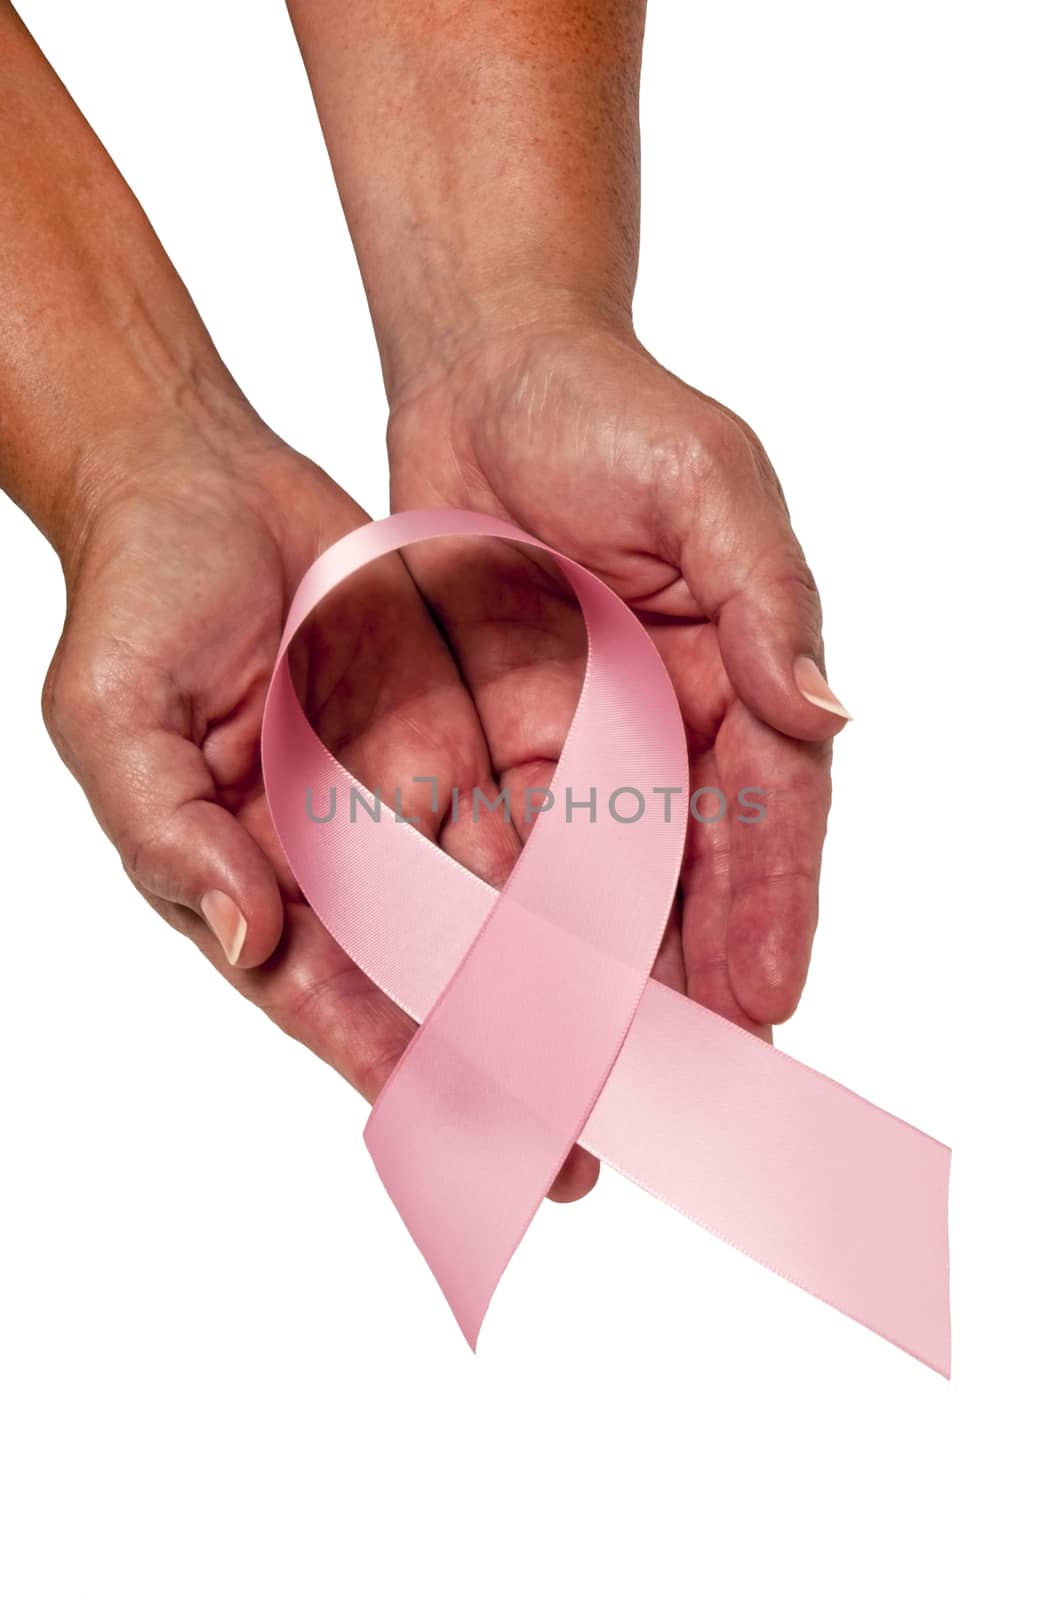 Breast Cancer Awareness Ribbon In Gentle Female Hands by stockbuster1